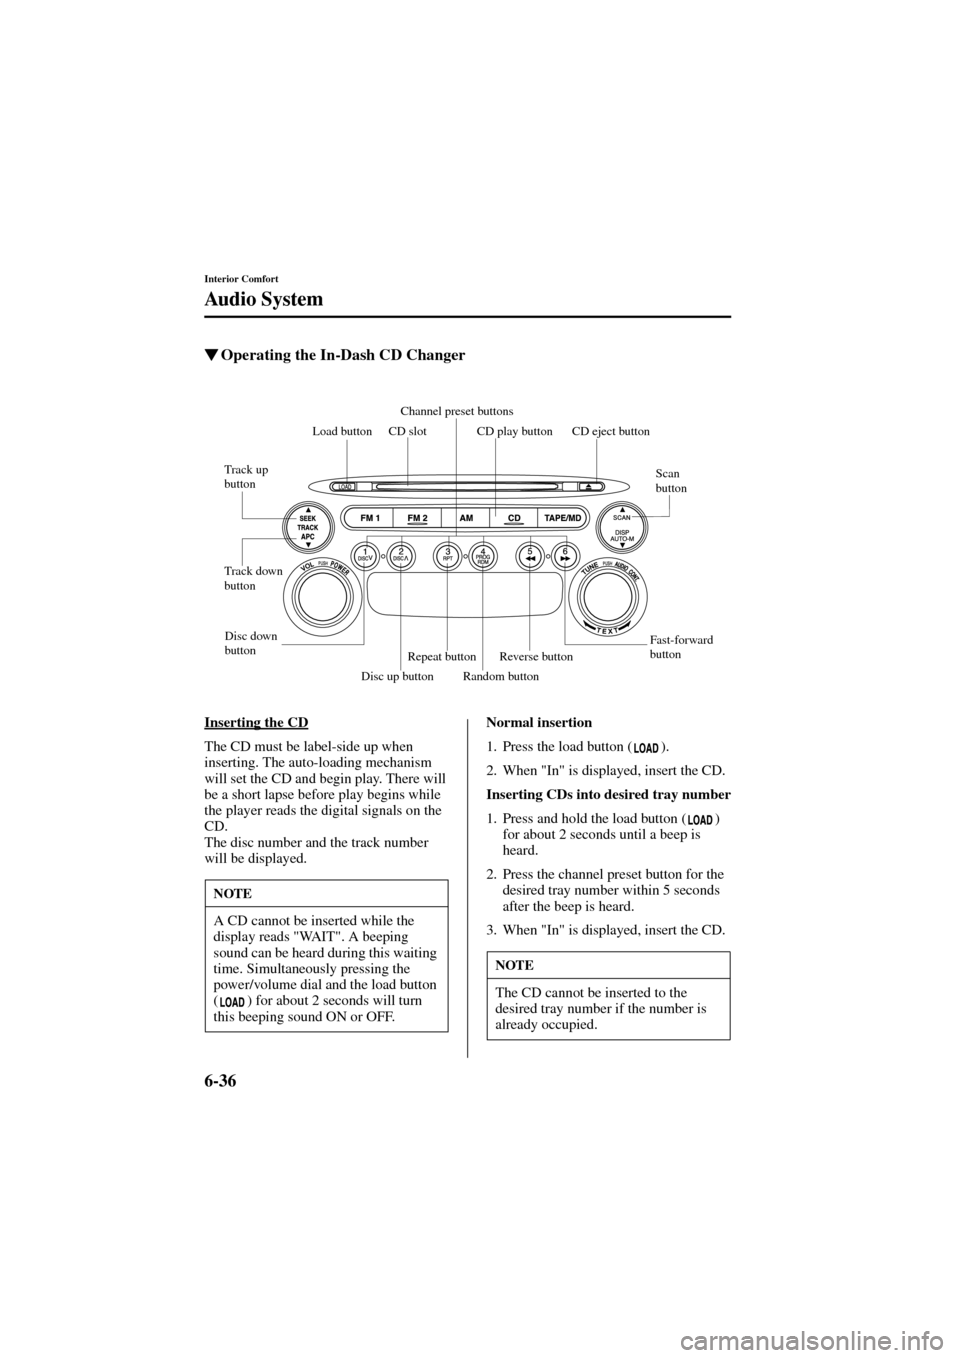 MAZDA MODEL 6 2004  Owners Manual (in English) 6-36
Interior Comfort
Audio System
Form No. 8R29-EA-02I
Operating the In-Dash CD Changer
Inserting the CD
The CD must be label-side up when 
inserting. The auto-loading mechanism 
will set the CD and